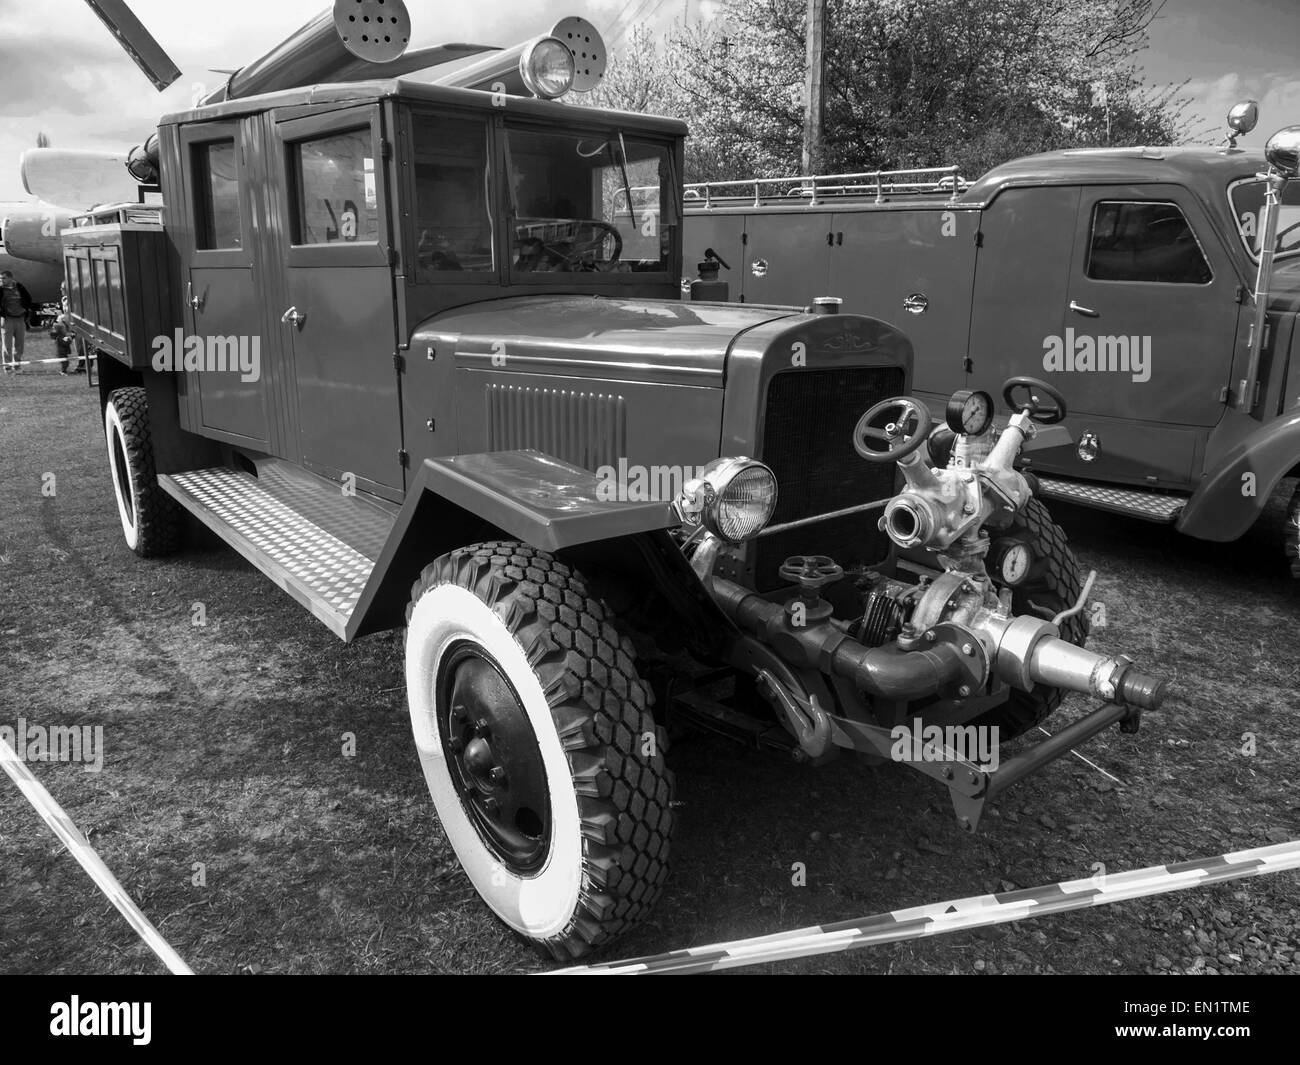 April 25, 2015 - Firetruck -- The Retro OldCarFest is the biggest retro cars festival held in Kiev, and covers the State Aviation Museum grounds. More than 300 cars are involved into this project and more than 20 thousand visitors are expected to attend. © Igor Golovniov/ZUMA Wire/Alamy Live News Stock Photo